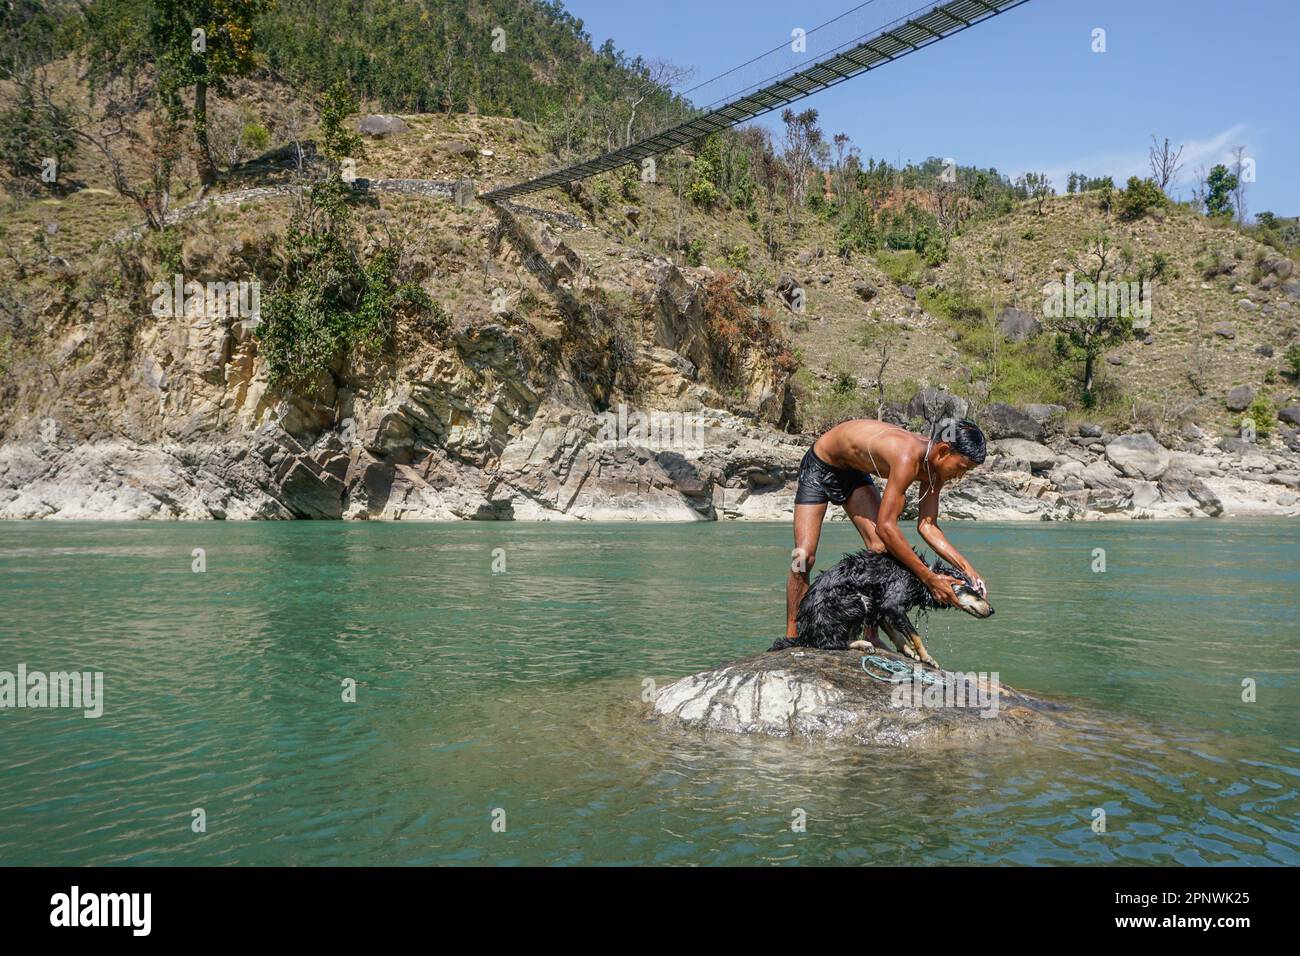 Hasta Bahadur Shahi, 18, bathes his dog, Johny, in Karnali River in Dailekh, Nepal on March 11, 2022. He enjoys spending time with 1-year-old Johny in the river on Saturdays during school holidays. (Shilu Manandhar/Global Press Journal) Stock Photo